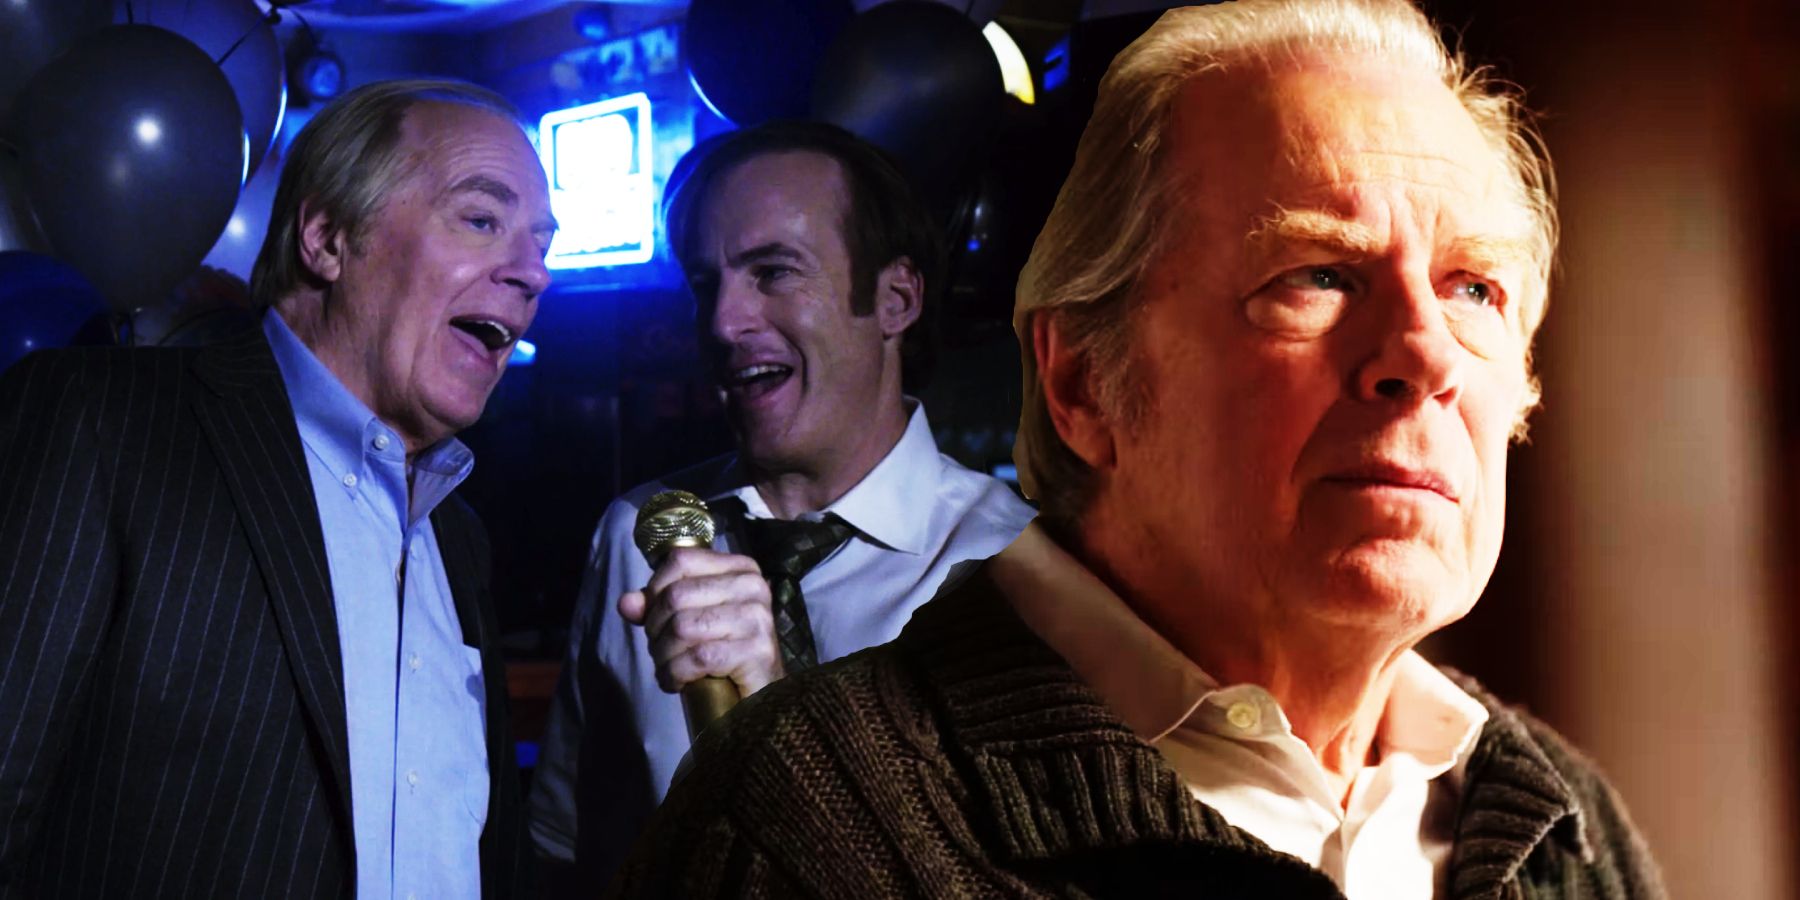 Michael McKean and Bob Odenkirk as Chuck and Jimmy McGill in Better Call Saul